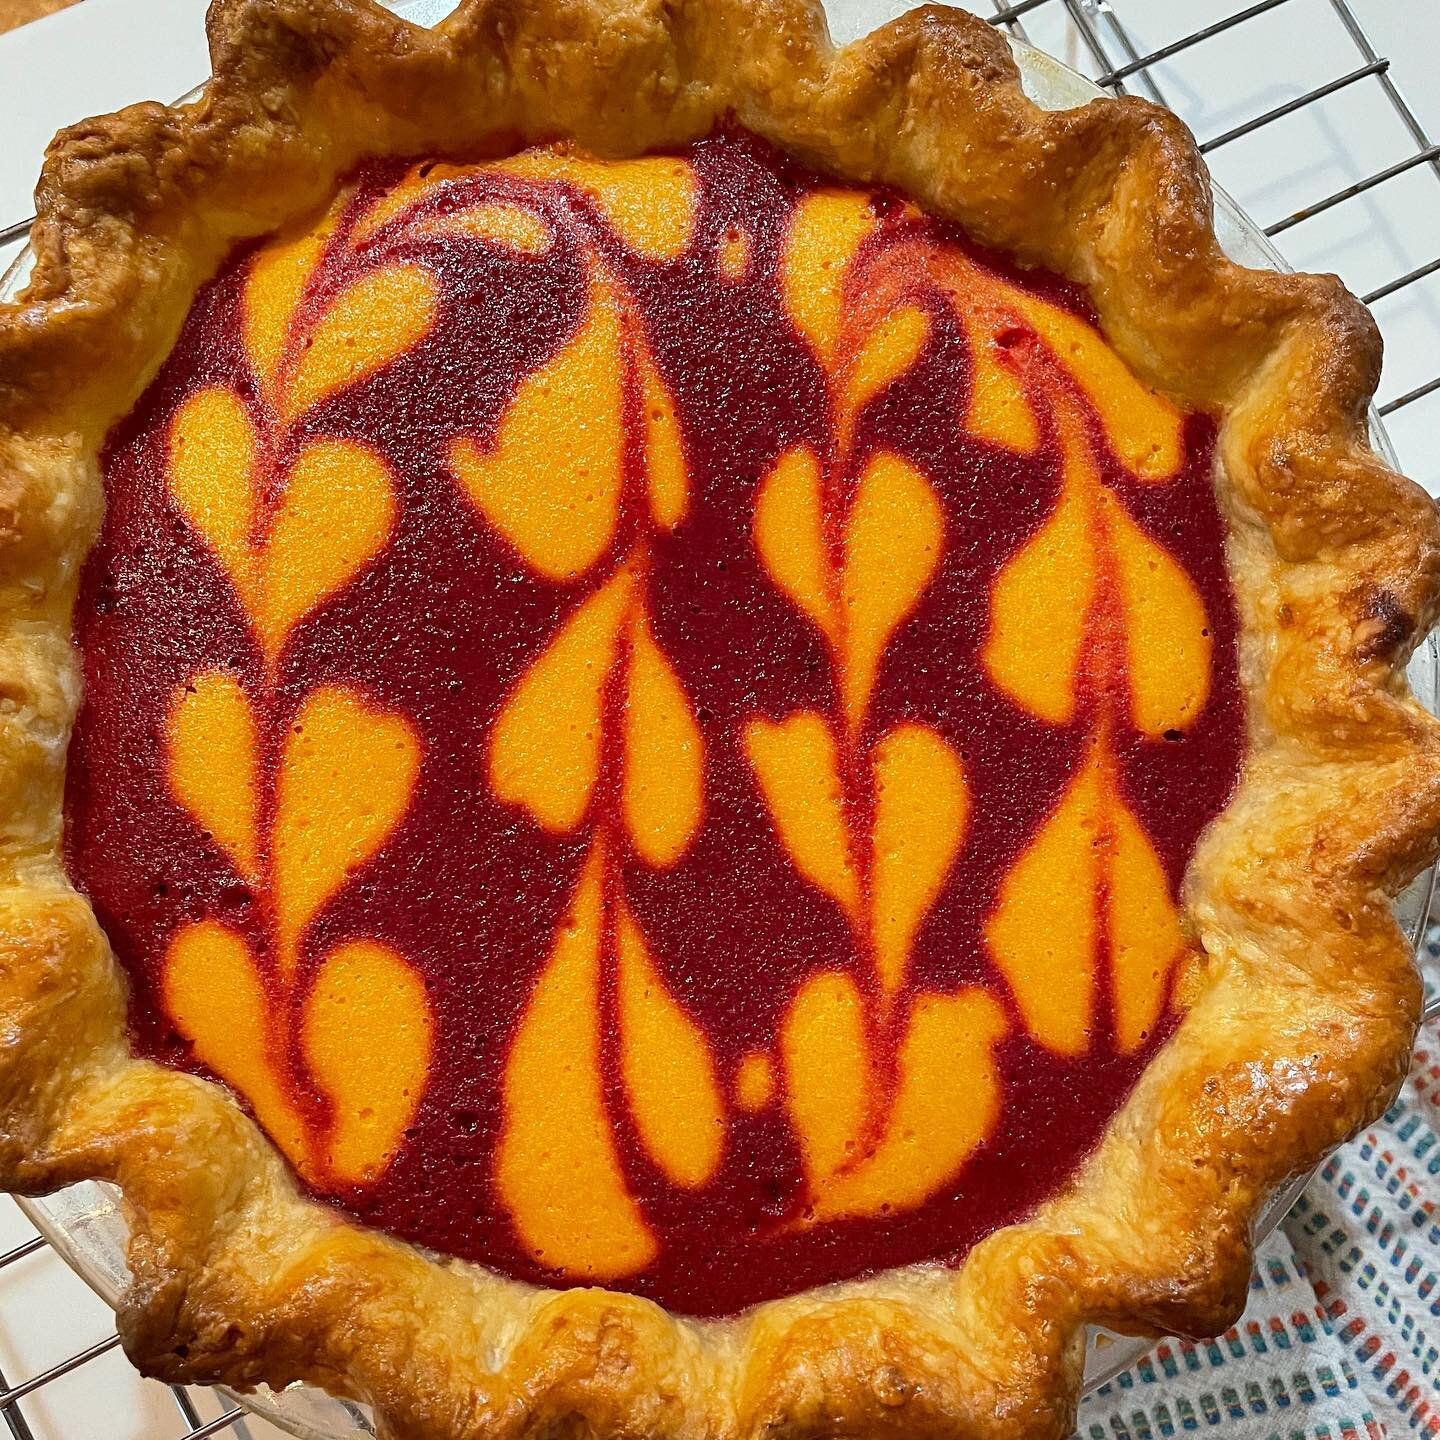 Cant get enough of these colors! 😍😋 #beetpie #piecrust #homemade #fritchinthekitchen #pieday